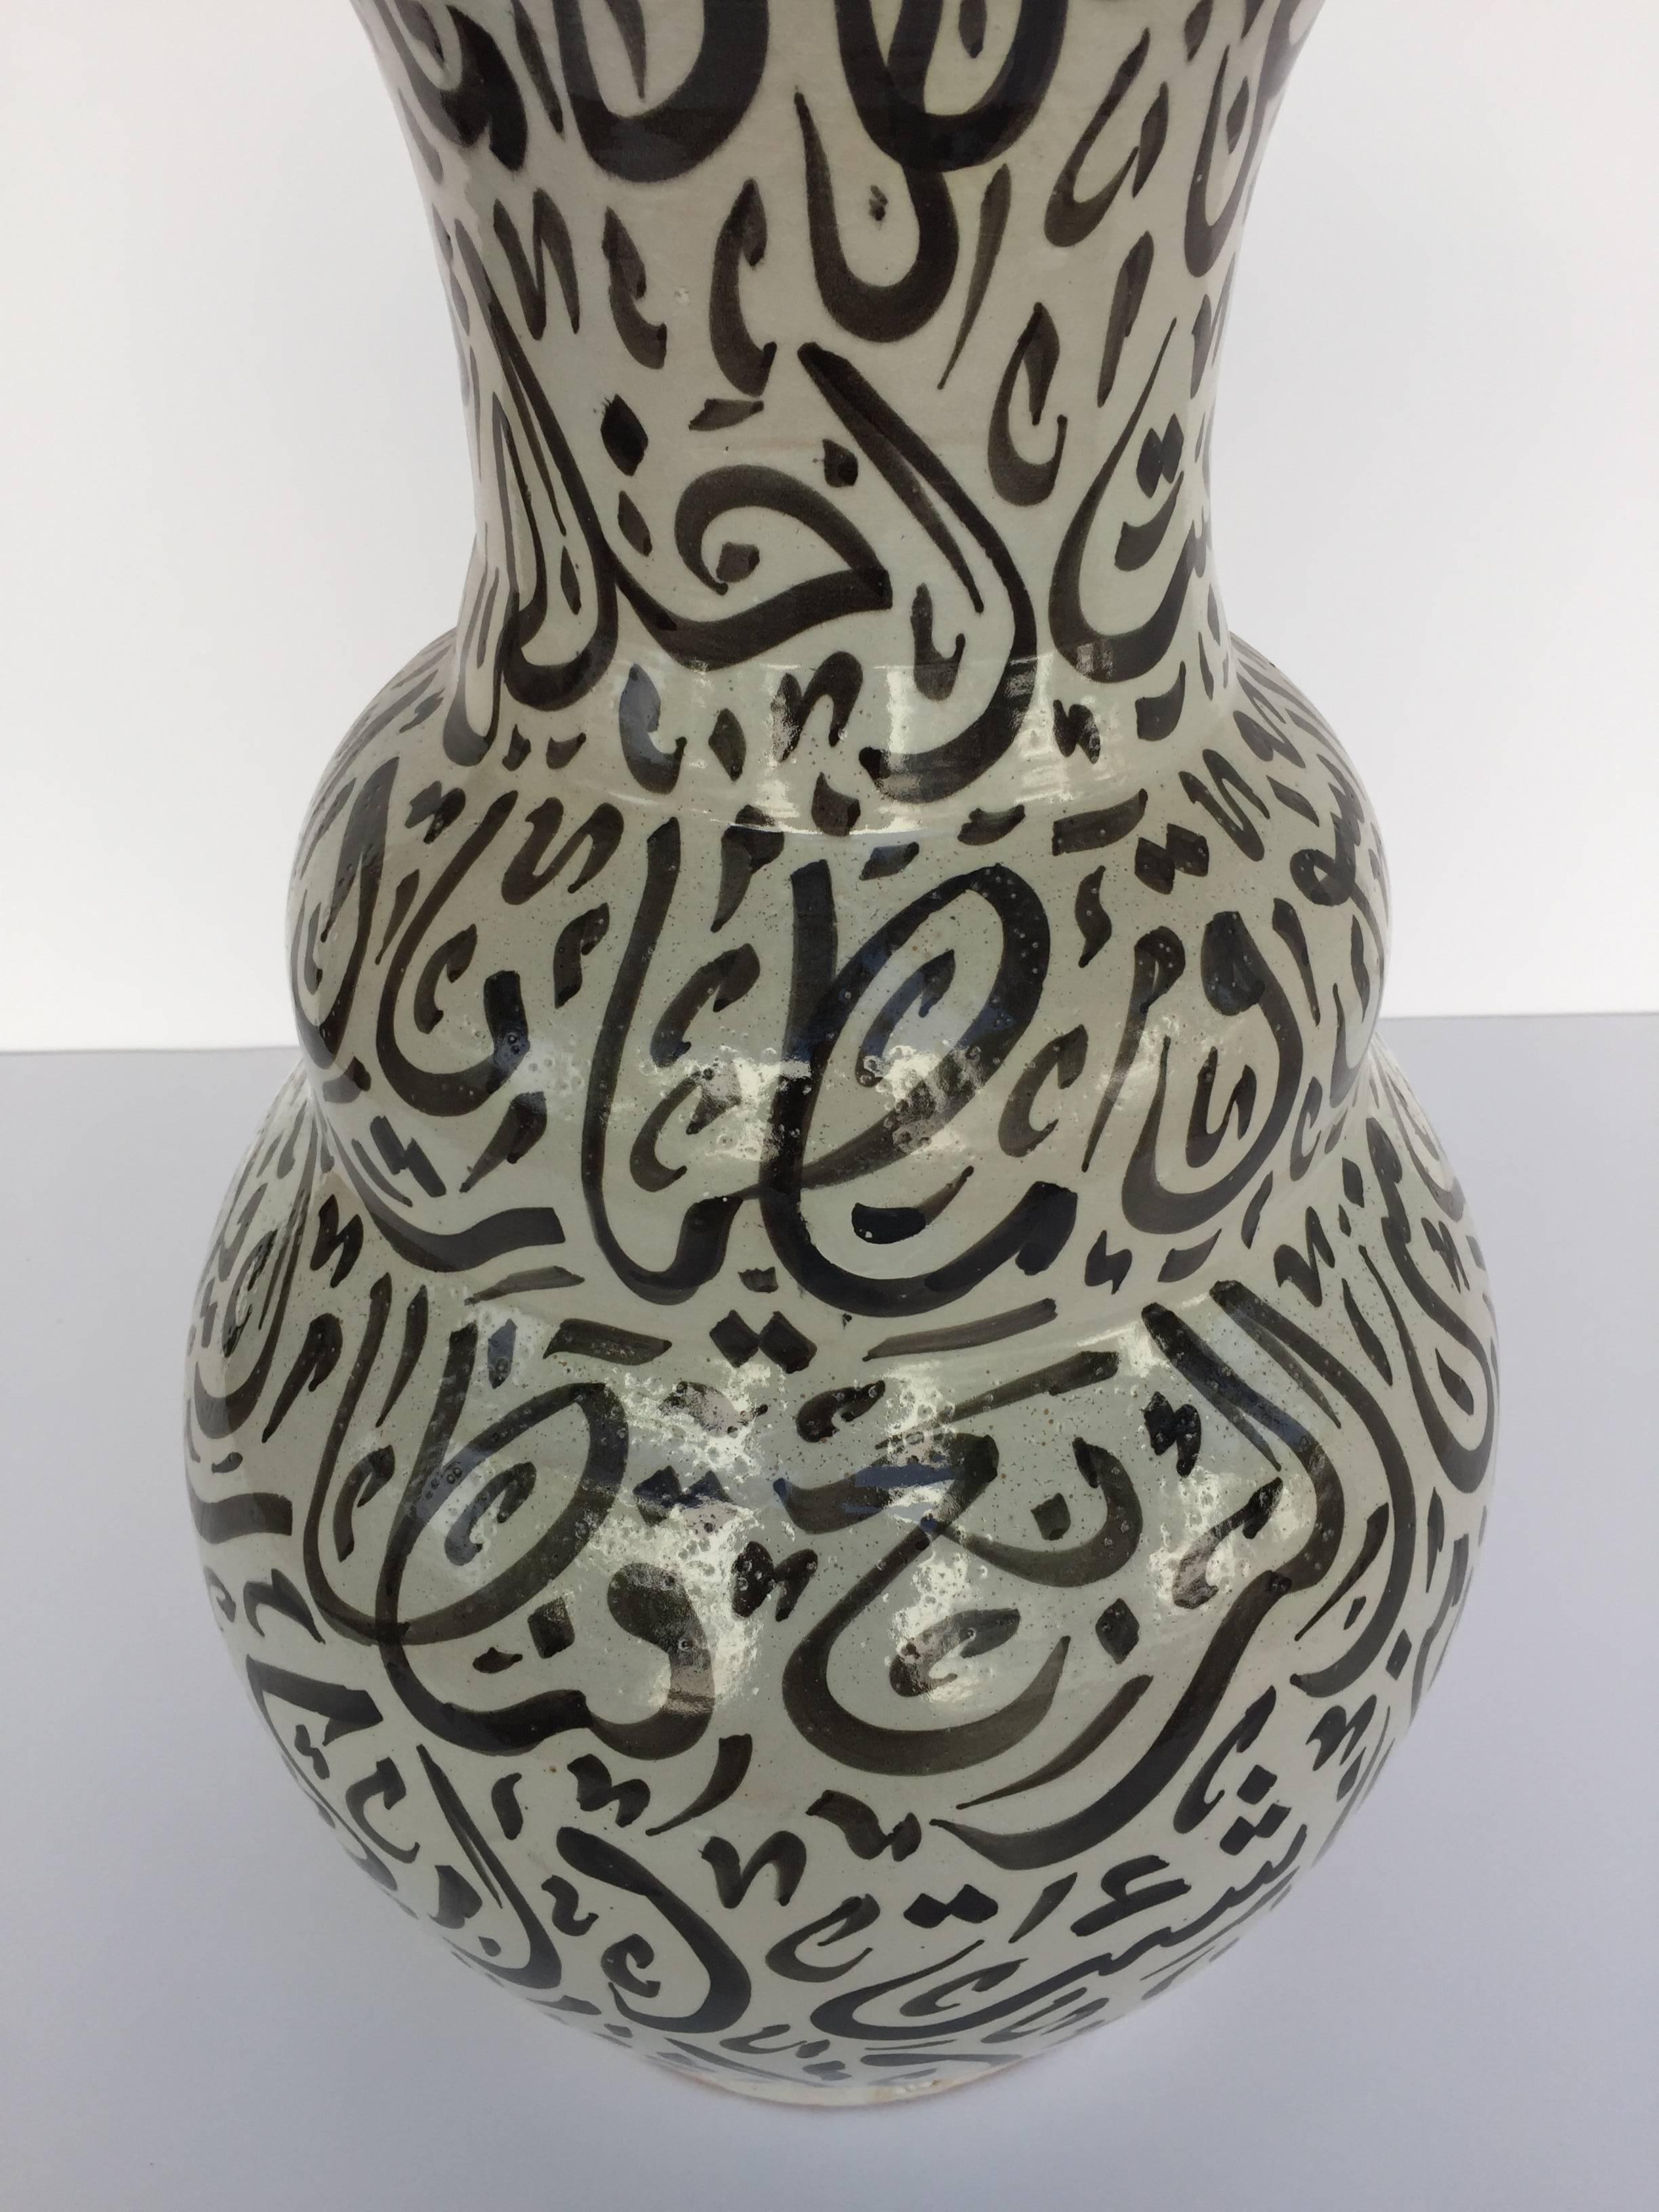 Large Moroccan Glazed Ceramic Vase from Fez with Arabic Calligraphy Writing In Good Condition For Sale In North Hollywood, CA